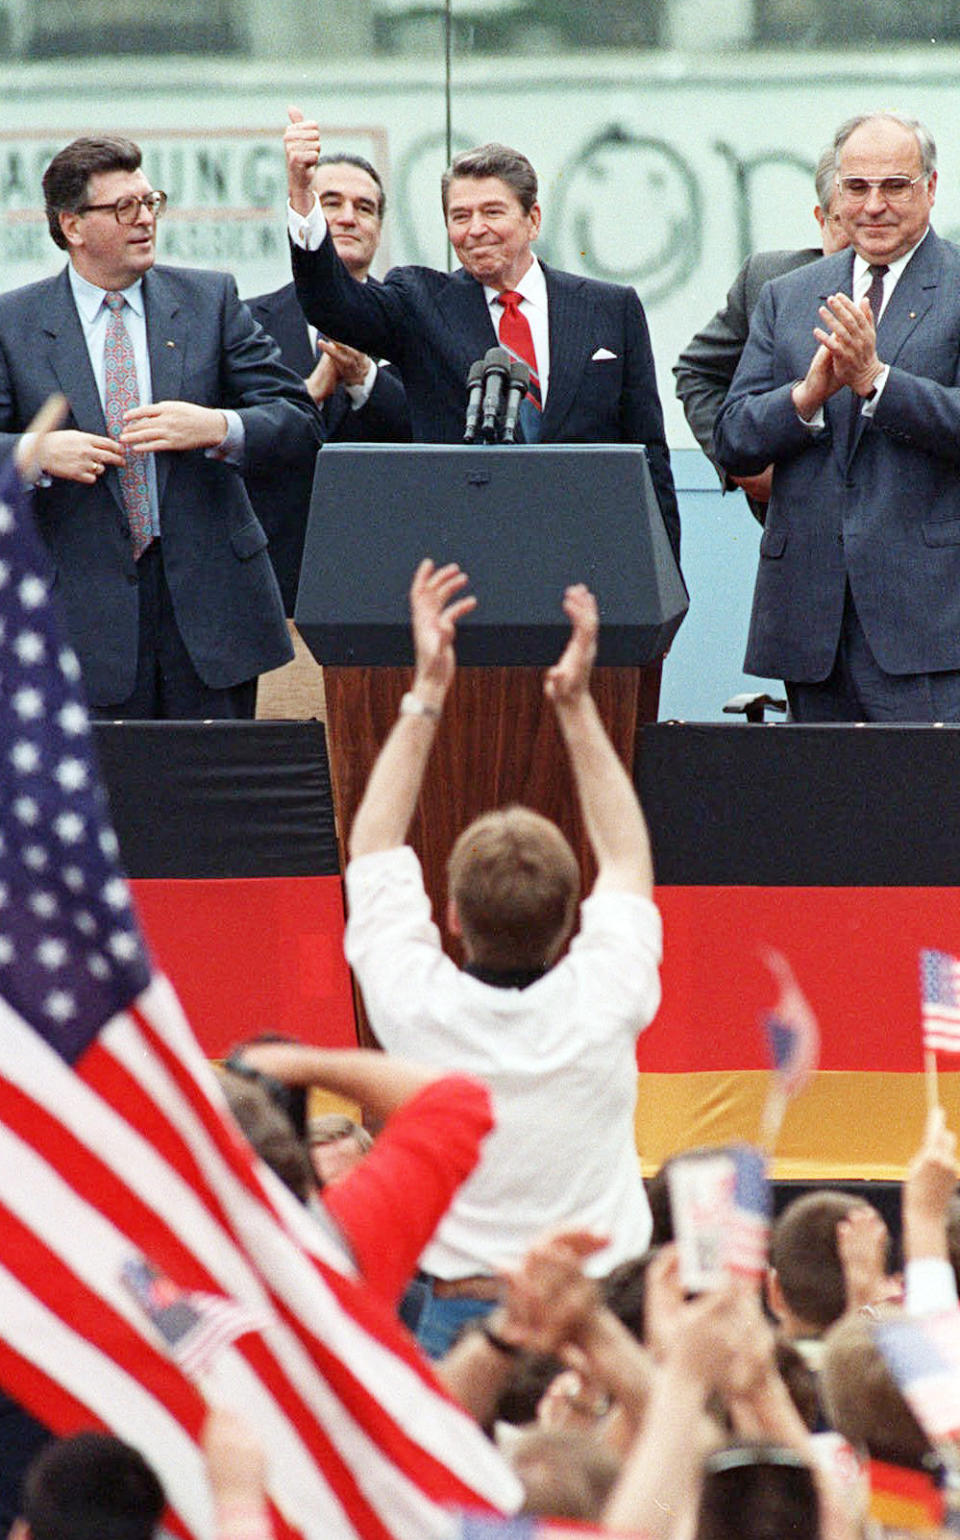 FILE - This Friday, June 12, 1987 file photo shows President Reagan giving a thumbs up sign after his speech in front of the Brandenburg Gate in West Berlin, where he had said "Mr. Gorbachev, tear down this wall! " Applauding Reagan are West German Chancellor Helmut Kohl, right, and West German Parliament President Philipp Jenninger, left. The U.S. Embassy in Berlin is unveiling the statue of Ronald Reagan as a tribute to the 30th anniversary of the fall of the Berlin Wall. The larger-than-life statue is being installed Friday atop the embassy's terrace, at eye-level with the landmark Brandenburg Gate in downtown Berlin. (AP Photo/J. Scott Applewhite, File)